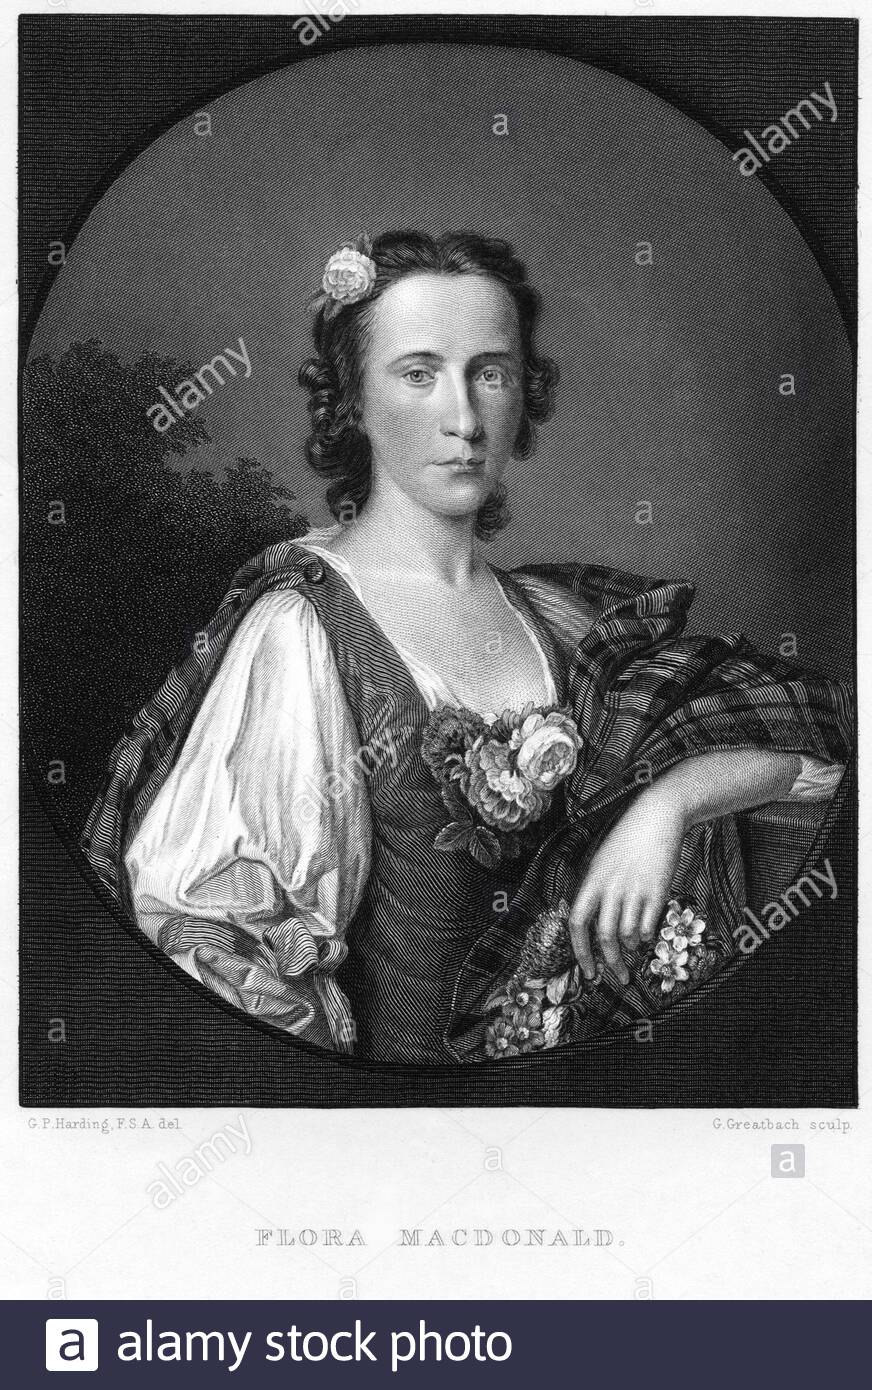 Flora MacDonald portrait, 1722 – 1790, was a member of the Macdonalds of Sleat, who helped Charles Edward Stuart evade government troops after the Battle of Culloden in April 1746, vintage illustration from 1847 Stock Photo